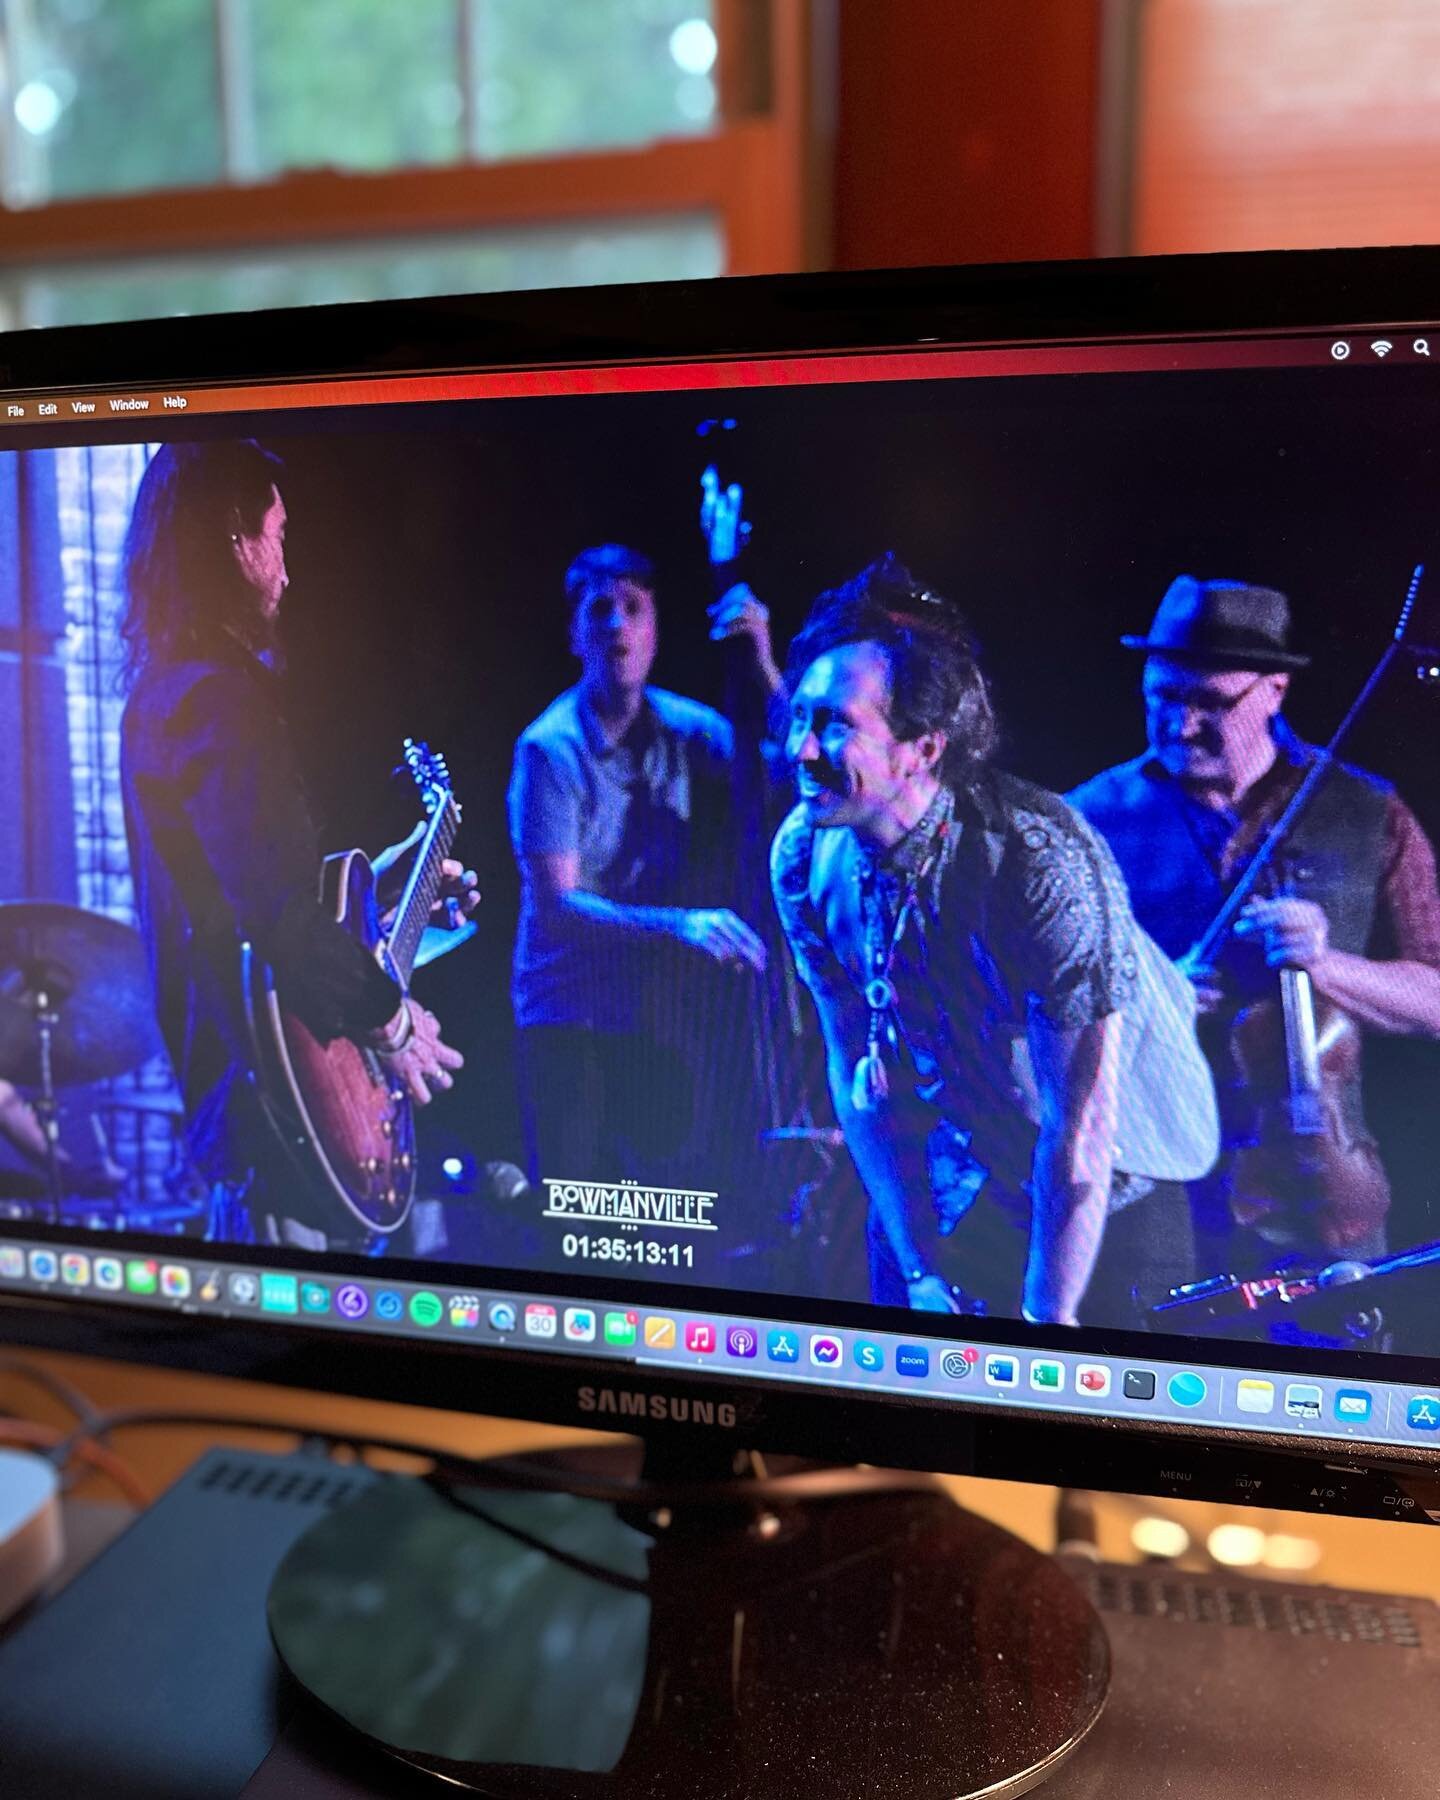 First look at the forthcoming vids. So amazing!!

#jazz #blues #chicago #chicagomusic #videoproduction #rock #music #guitar #harmonica #violin #uprightbass #drums #evanston #evanstonspace